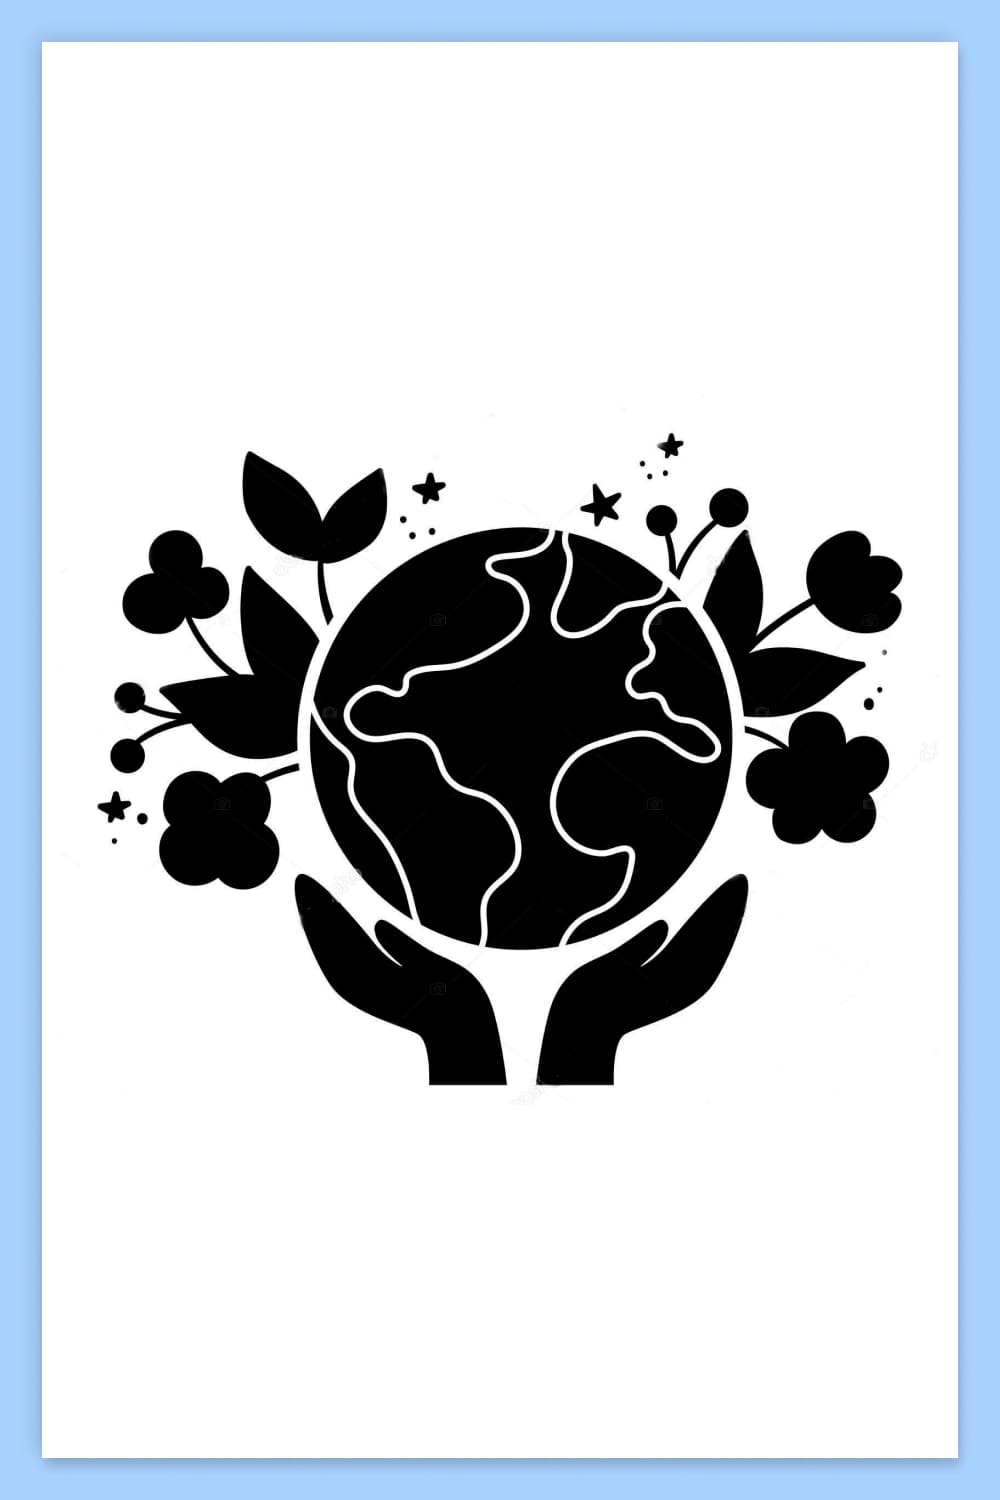 Drawing of hands holding a schematic representation of the planet Earth and flowers.